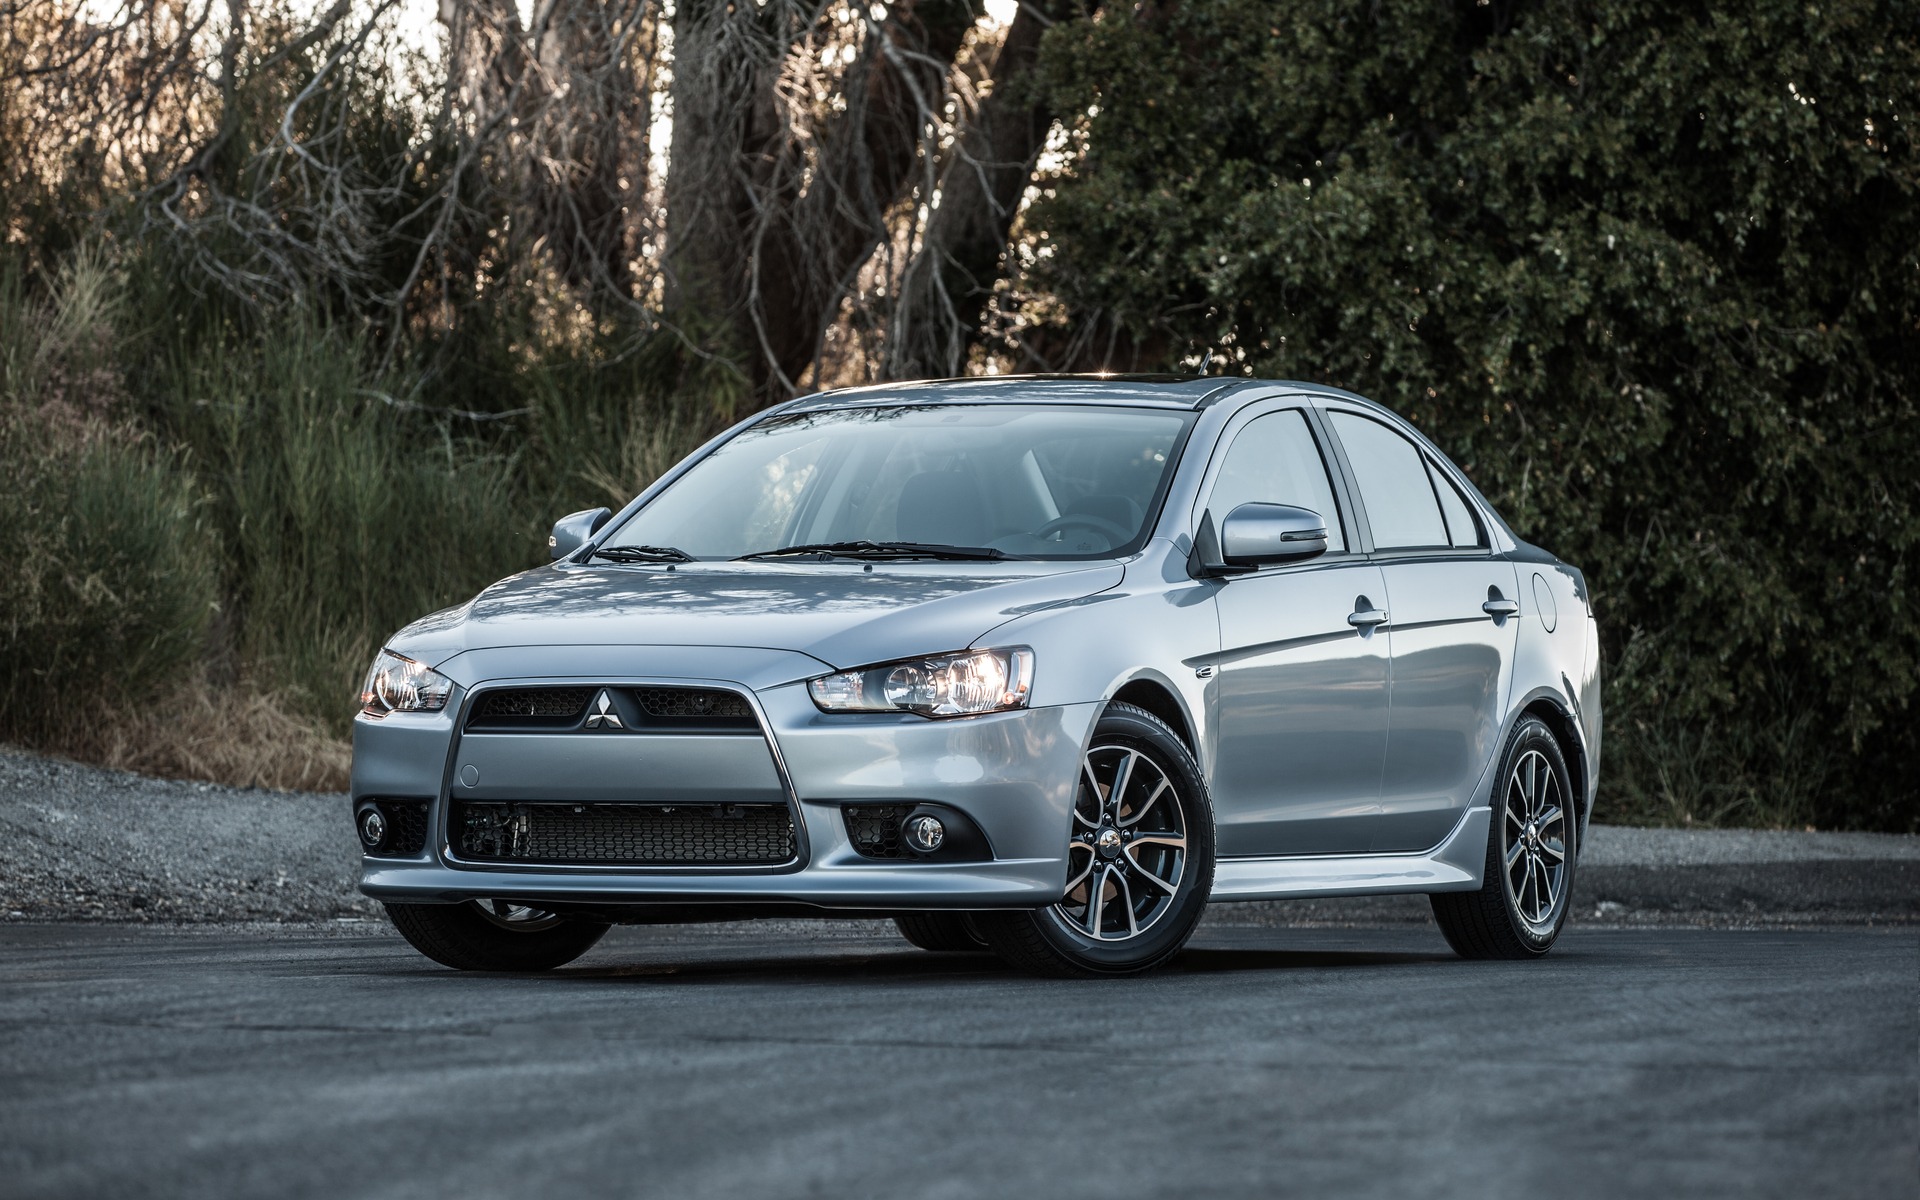 2016 Mitsubishi Lancer - News, reviews, picture galleries and videos - The  Car Guide